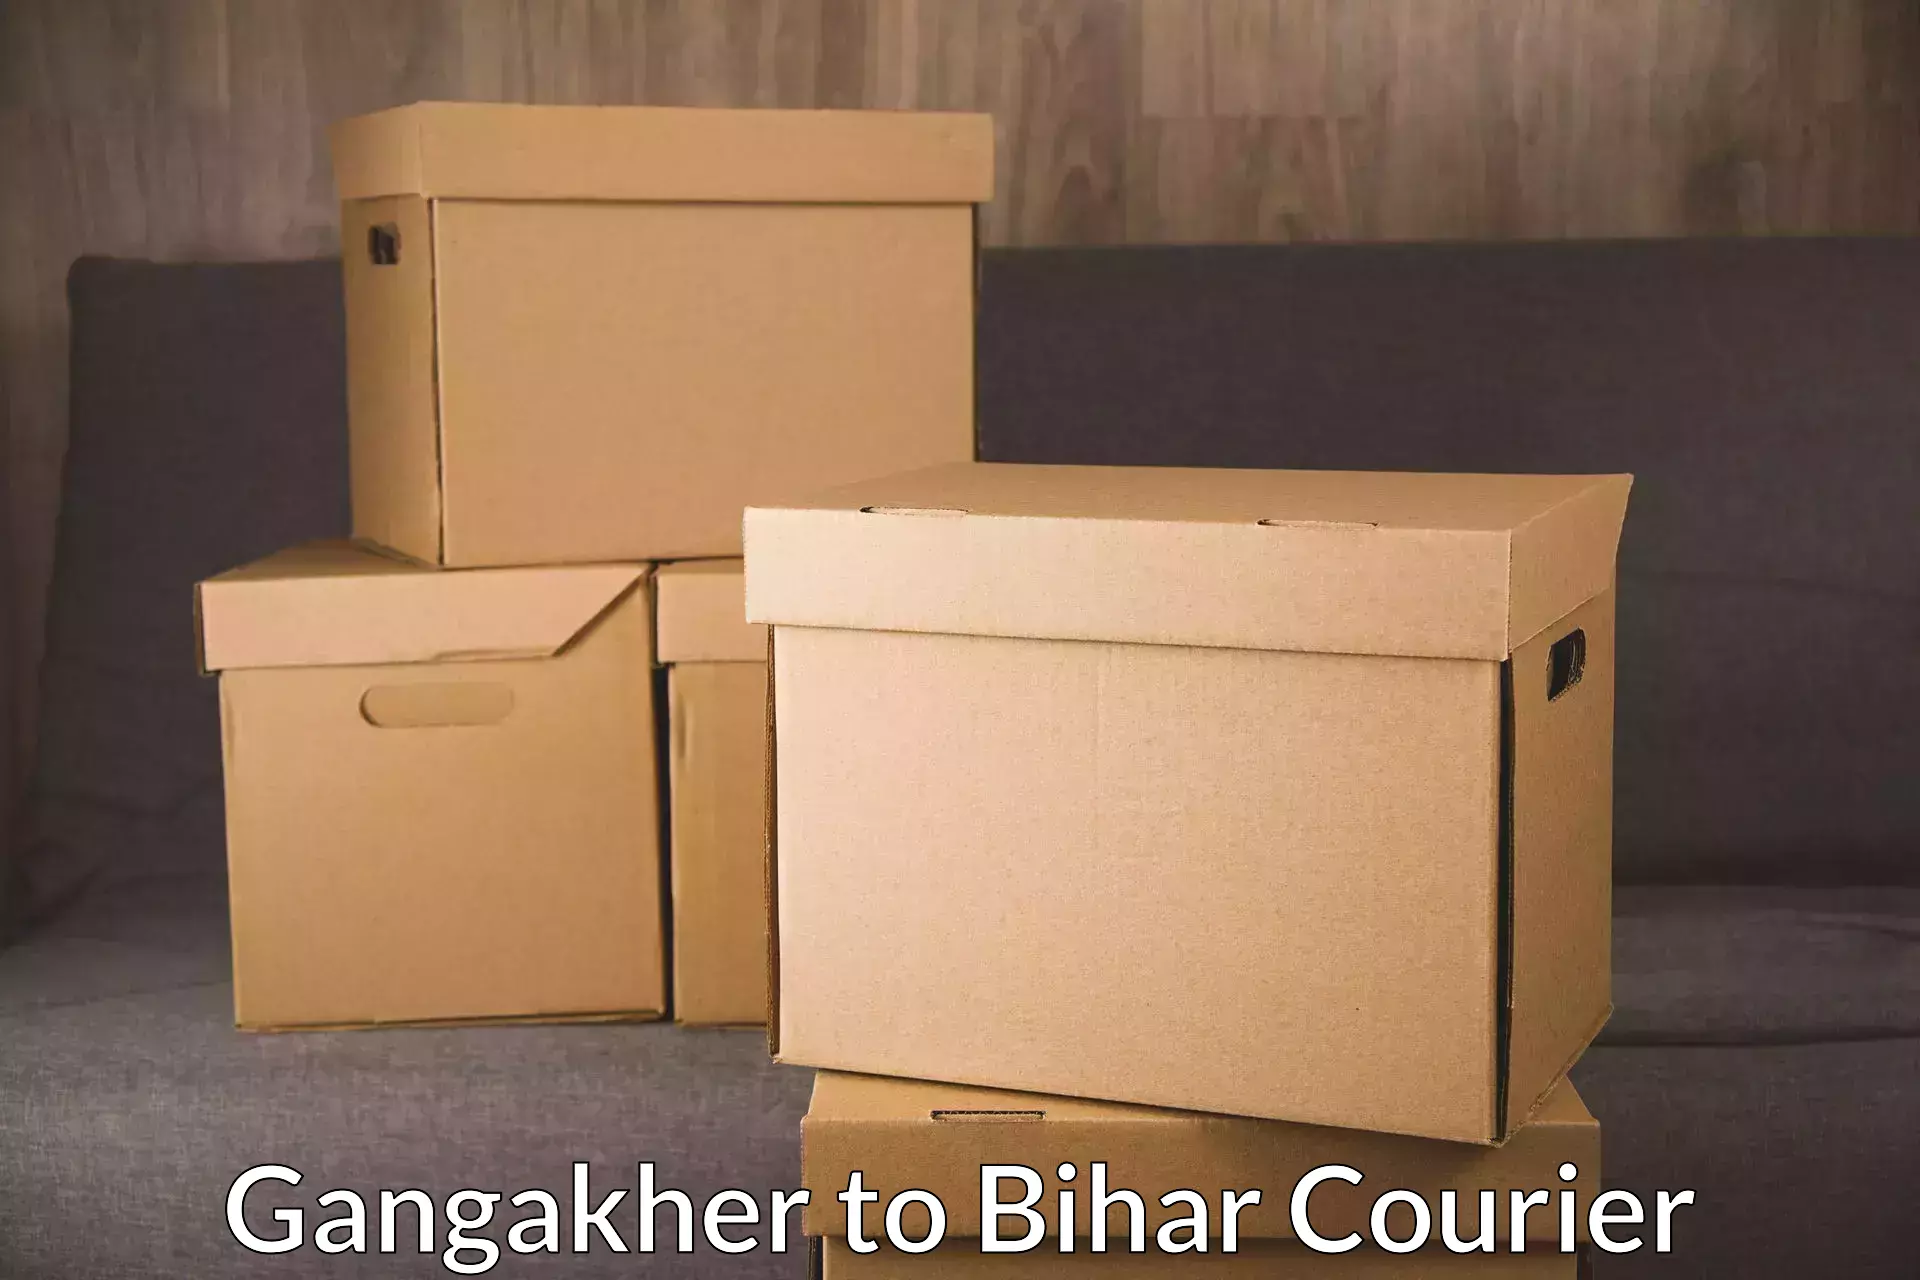 Full-service courier options Gangakher to Jehanabad